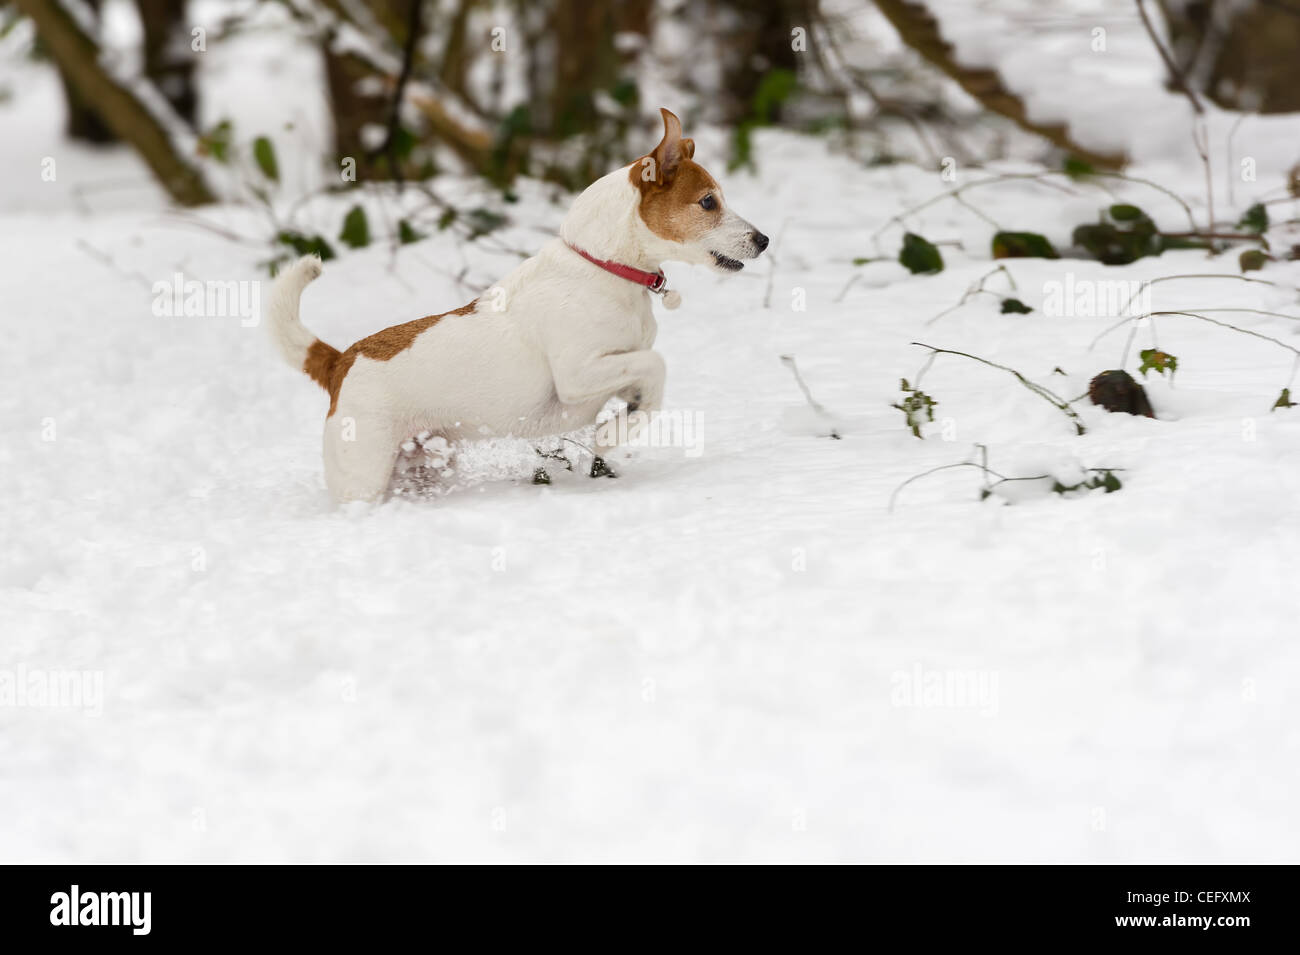 Excited Parson Jack Russell Terrier wading through deep snow Stock Photo